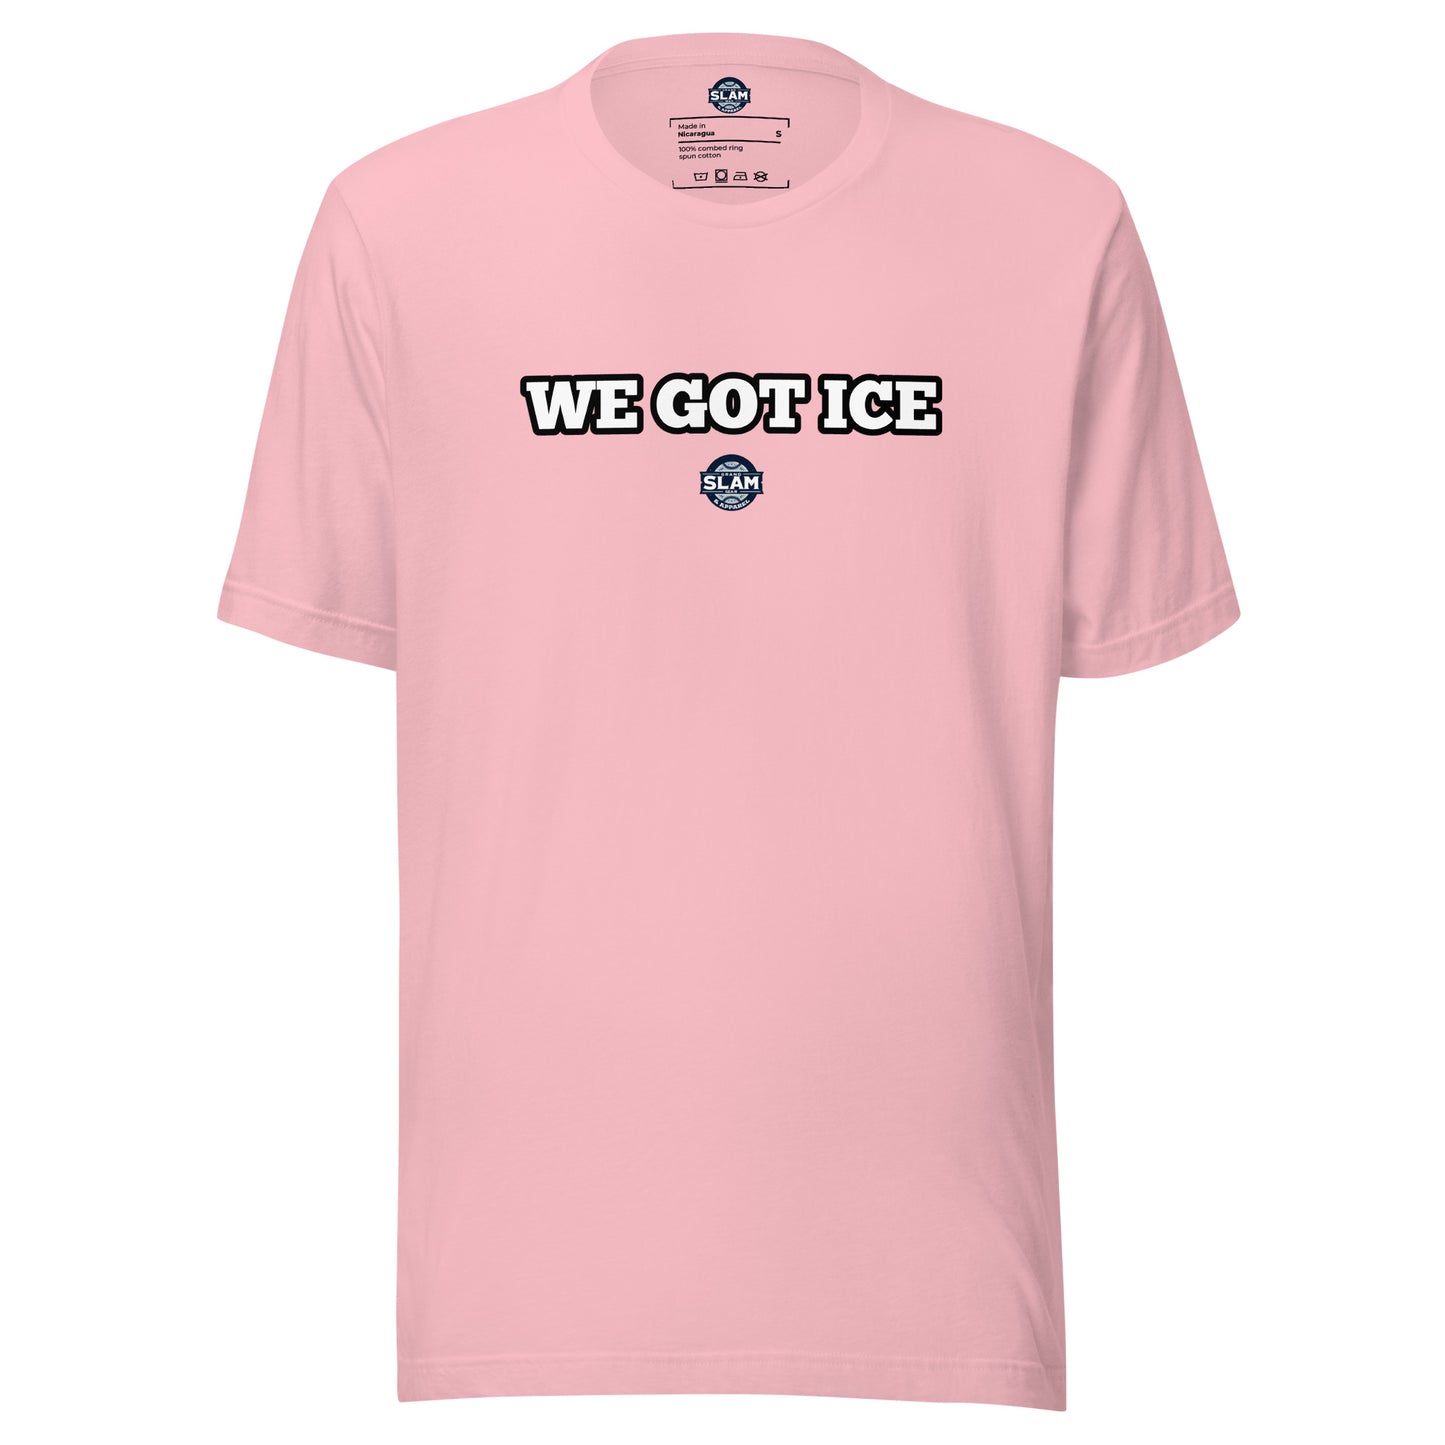 "We Got Ice" Ultra-Soft Lightweight T-Shirt - Comfy & Stretchy | Unisex Fit